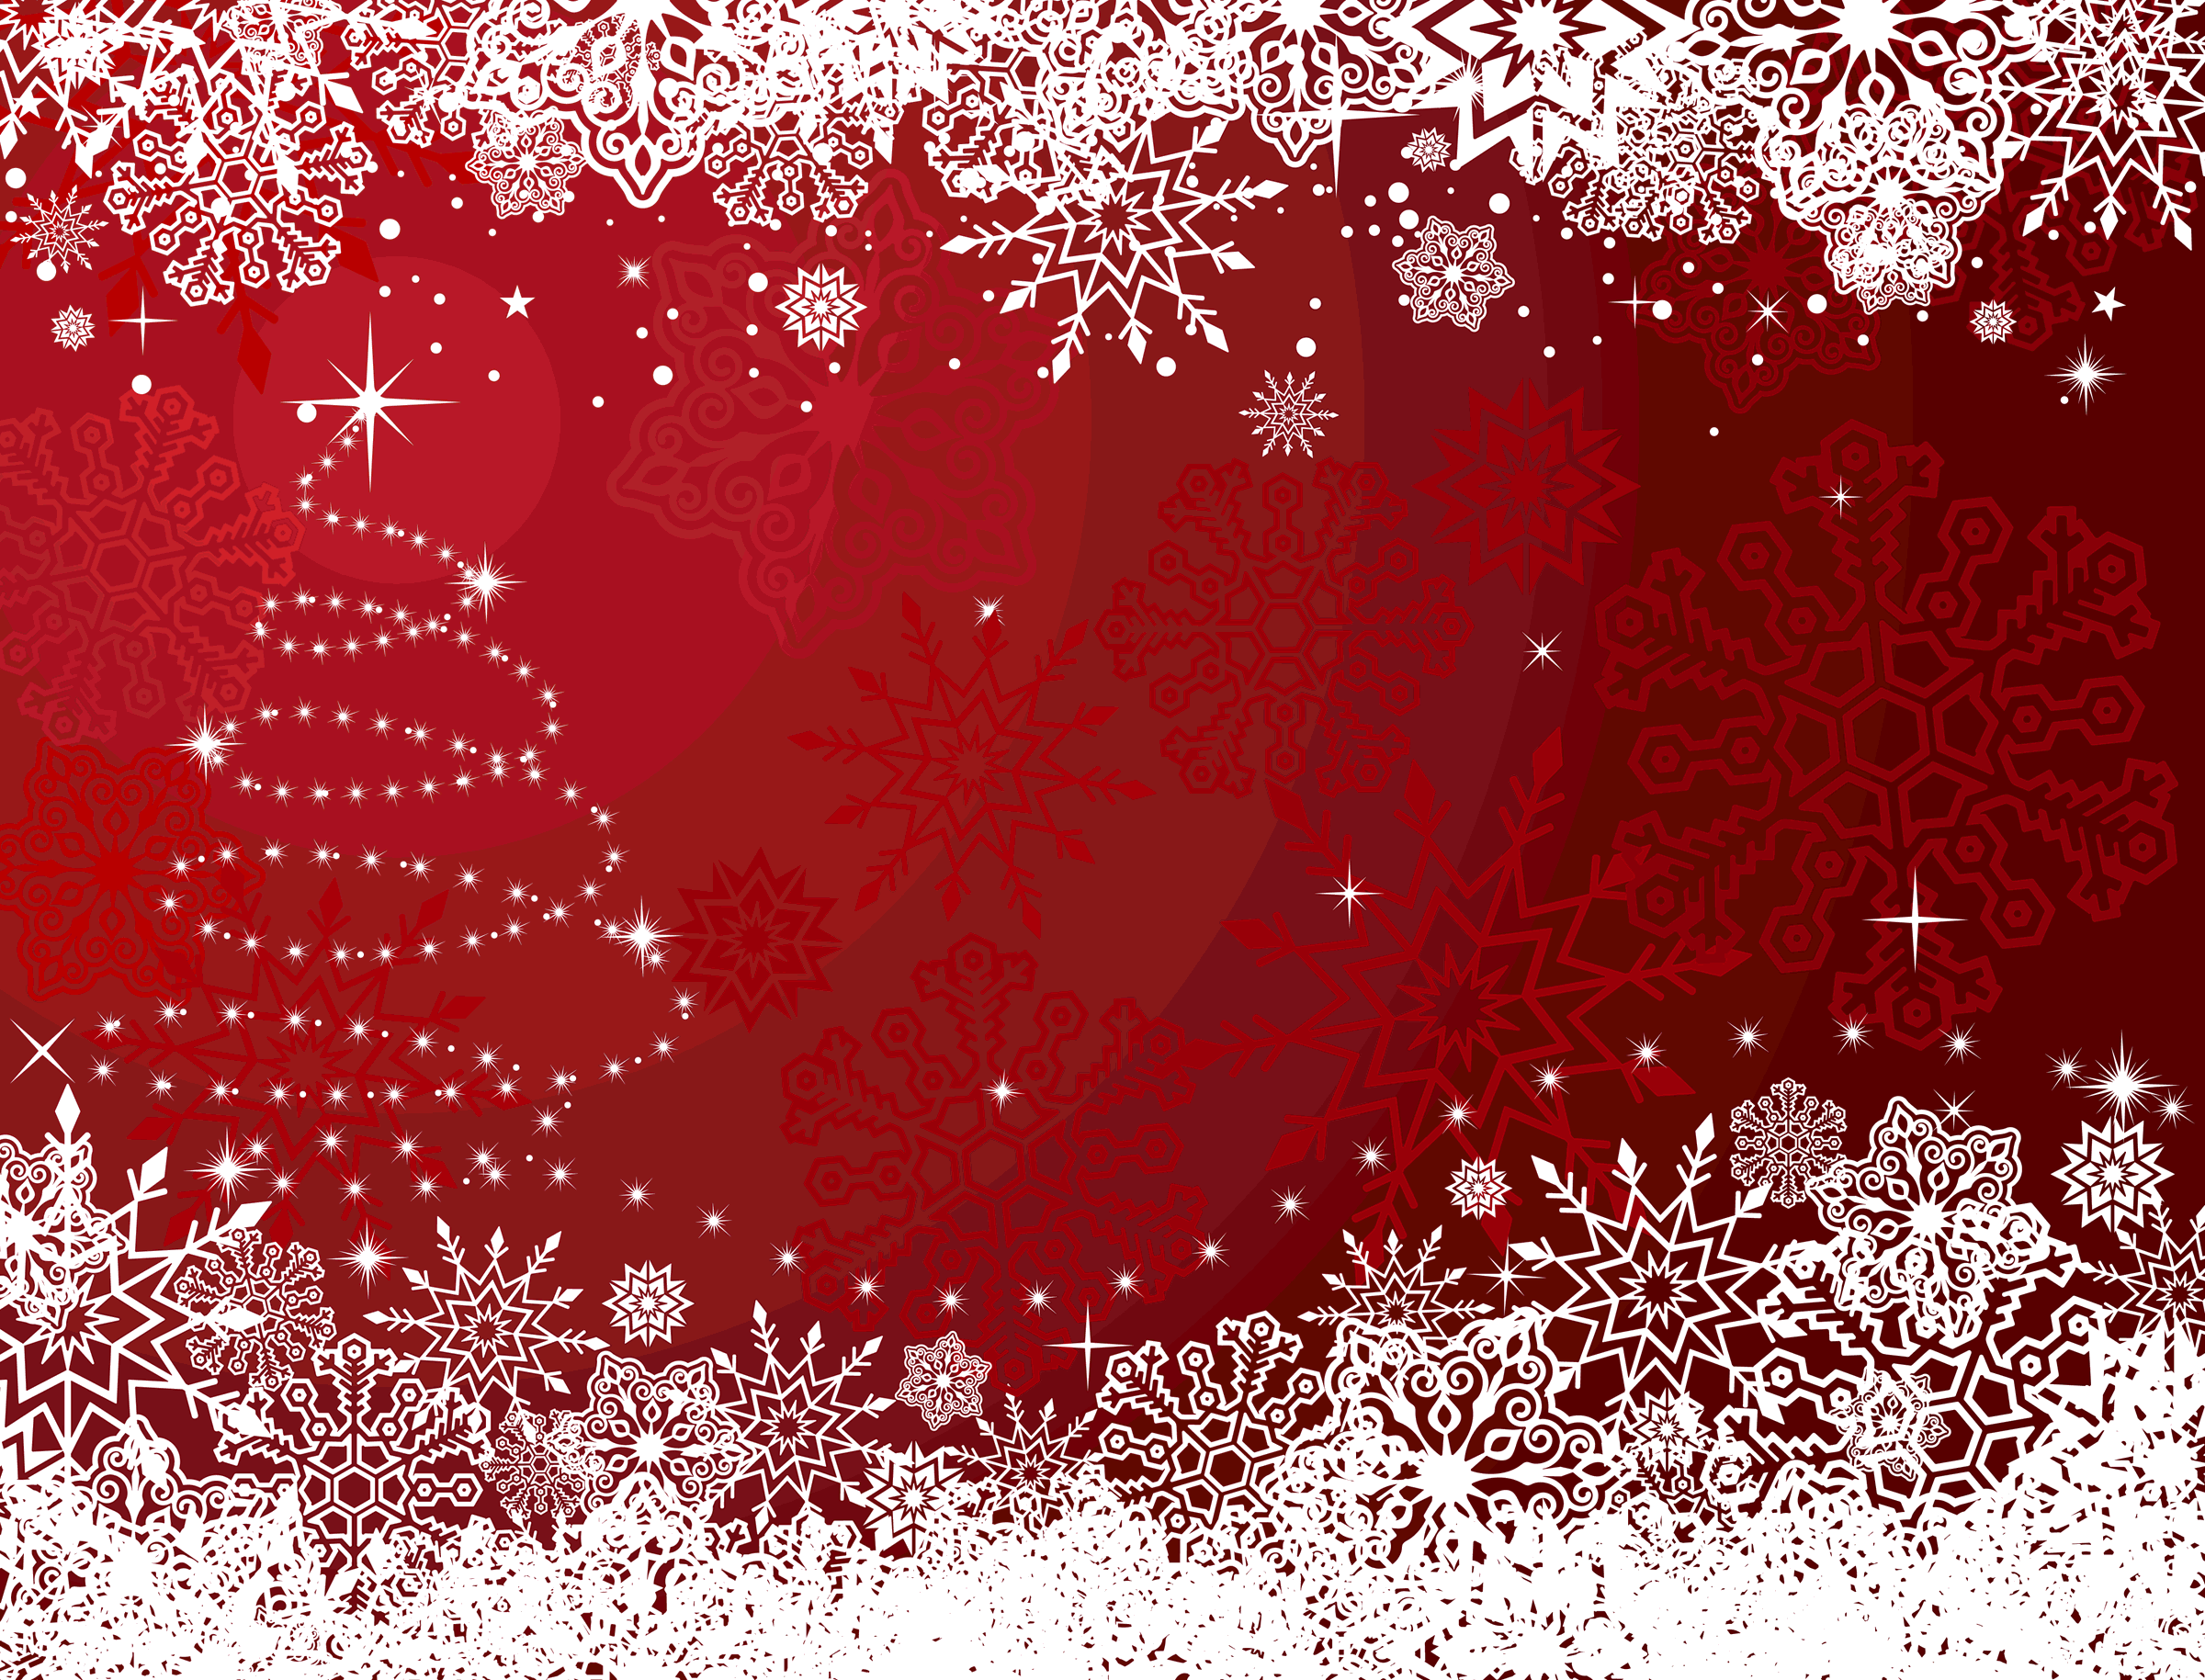 Backgrounds Wallpapers Red Christmas